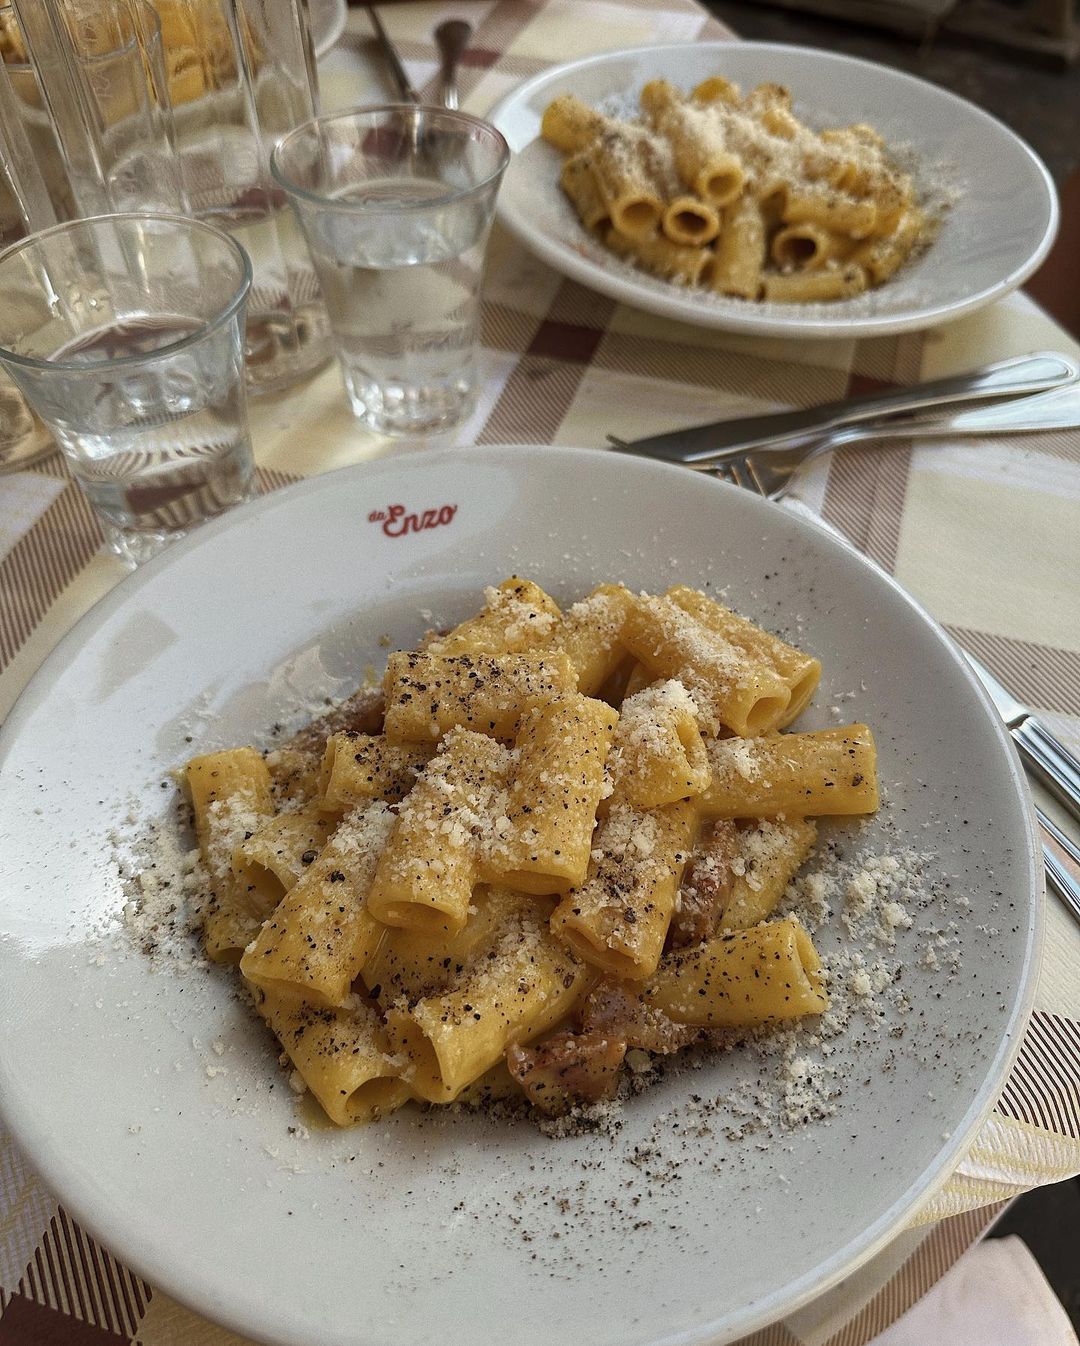 What are some good restaurants in Rome?